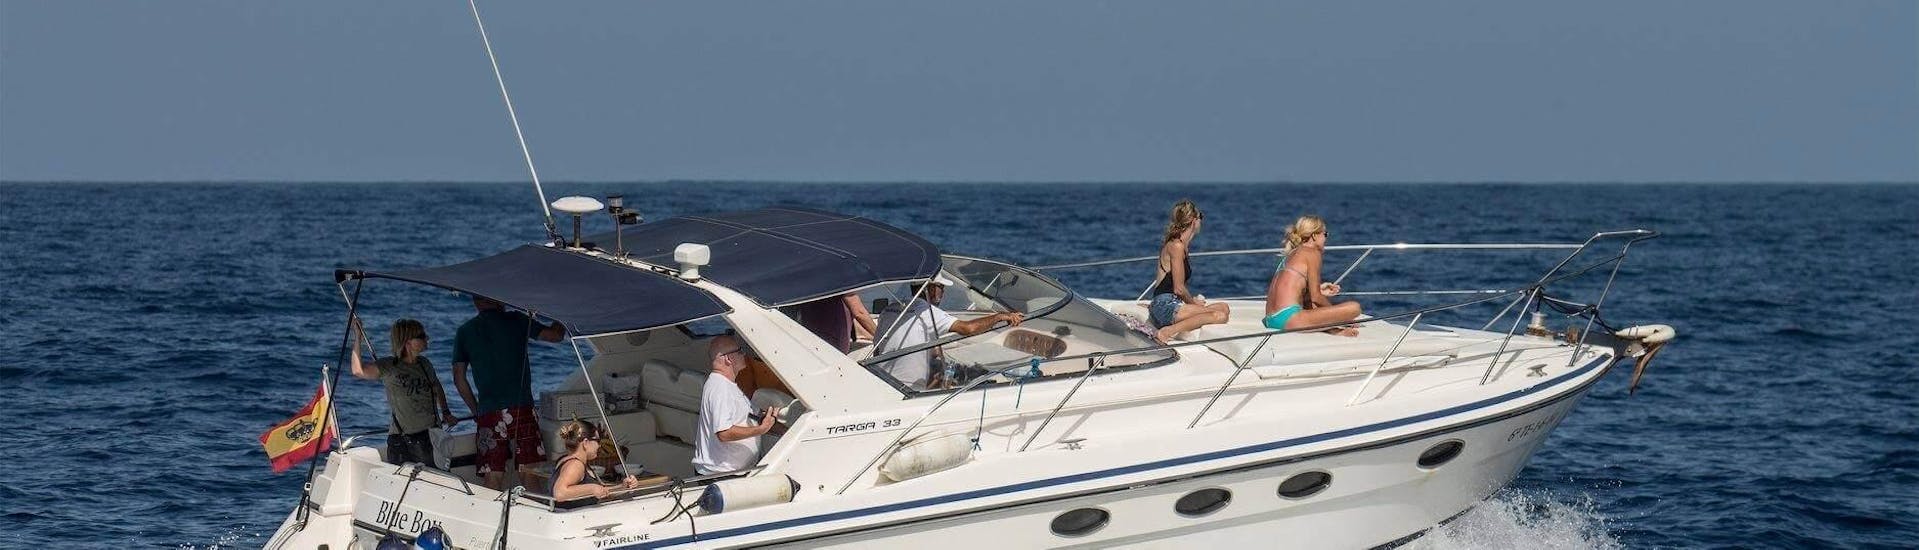 A yacht goes on a trip to Costa Adeje with Tenerife Sailing Charters.